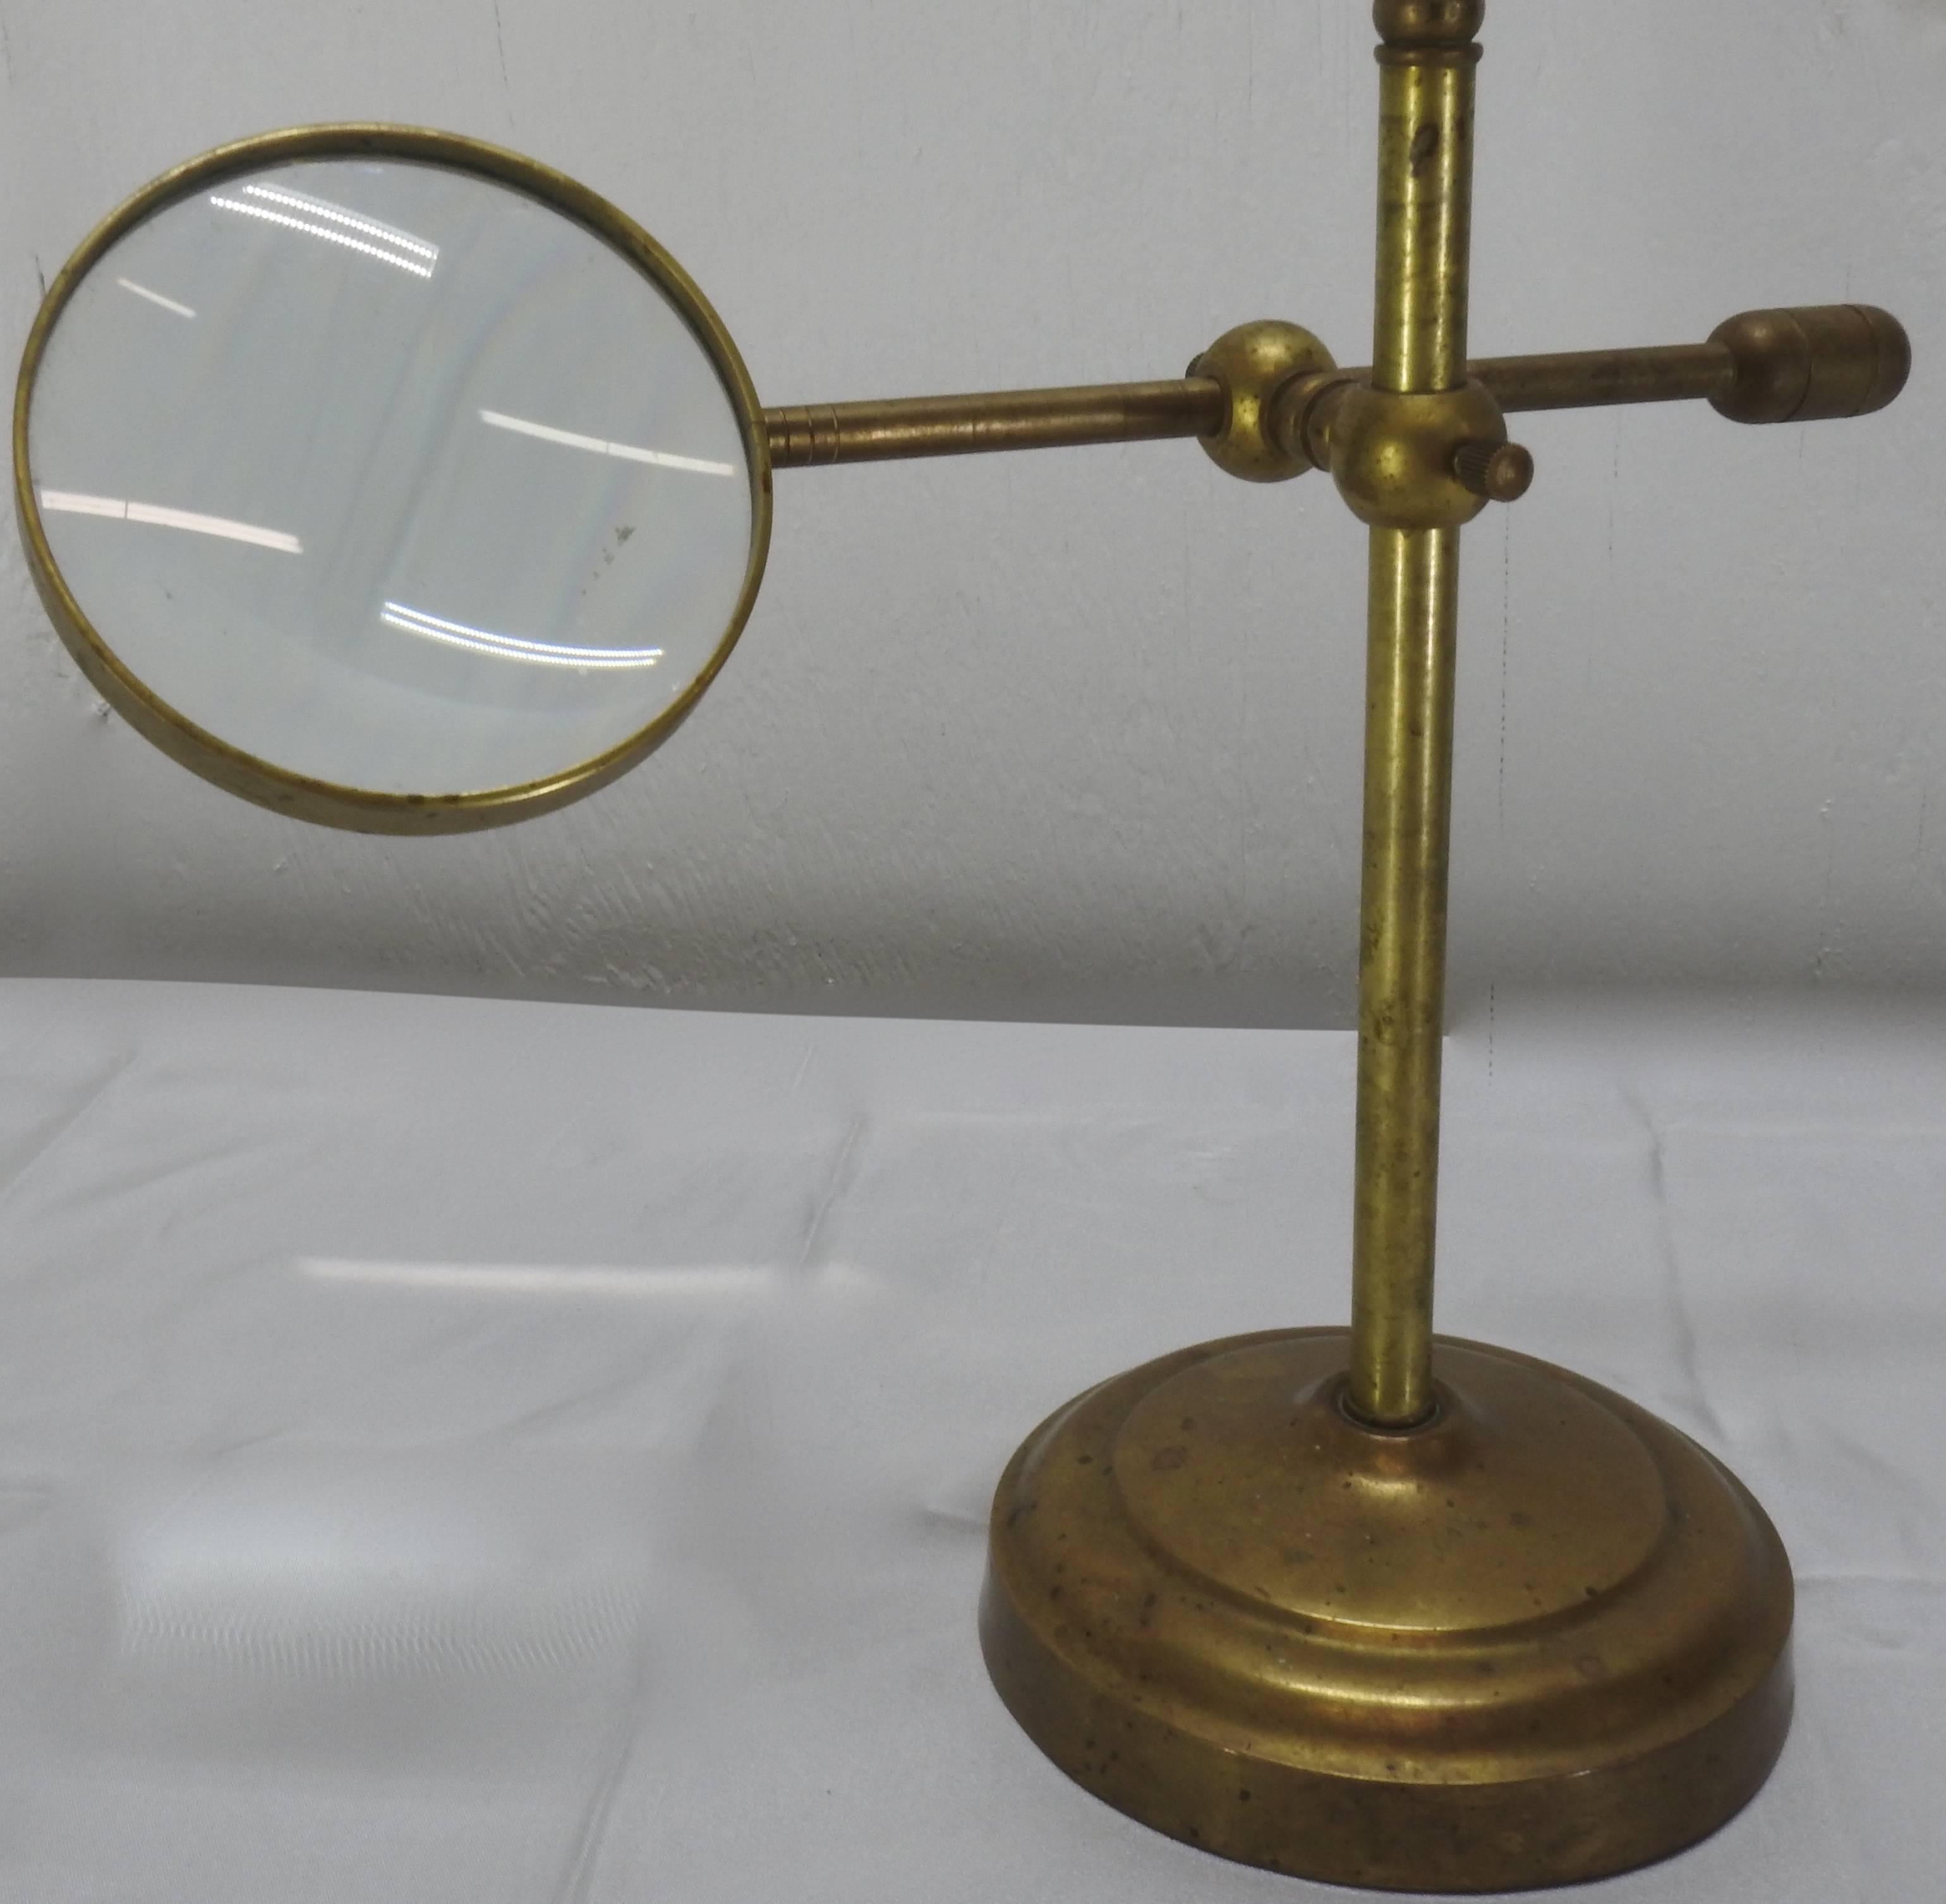 This Classic industrial style magnifier rests on a stand and is adjustable. You can move it up and down and side to side. It also rotates. This is just what you need to help you view your valuables! It has a beautiful aged patina.